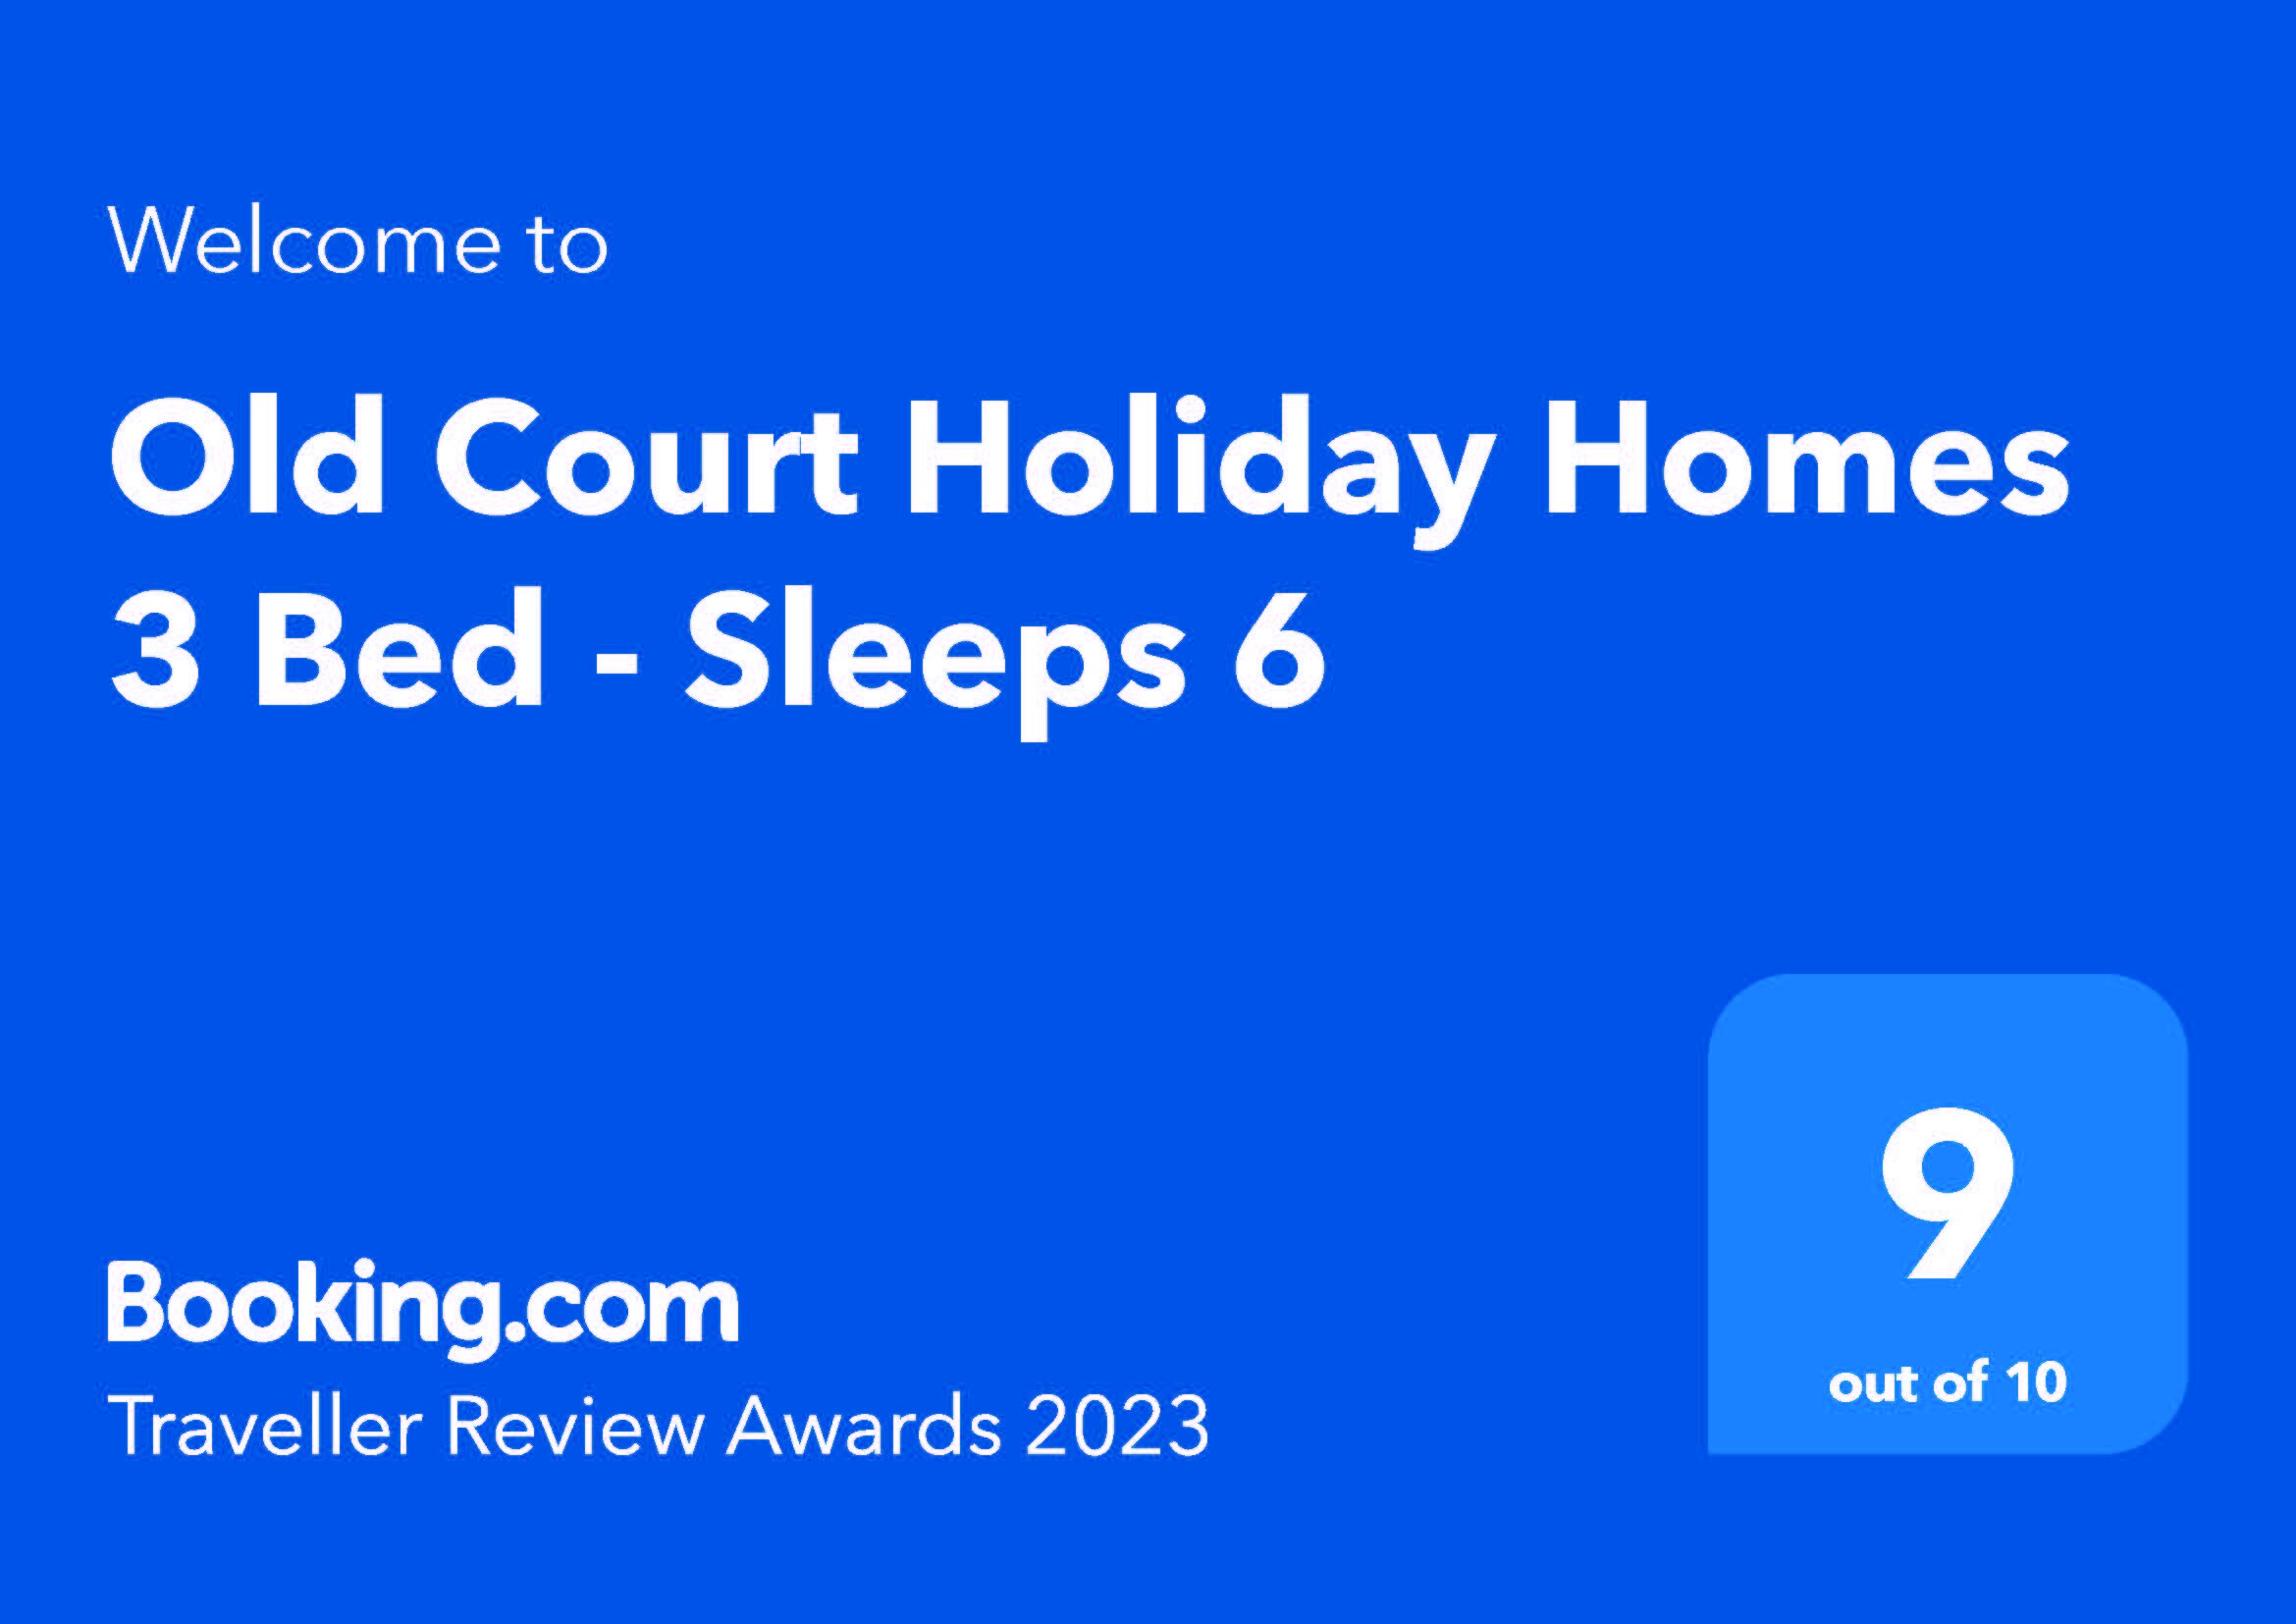 Booking.com Traveller Awards | Old Court House Holiday Home, Pretty Lakeside Self Catering Holiday Accommodation Available Near Terryyglass & lough Derg in County Tipperary